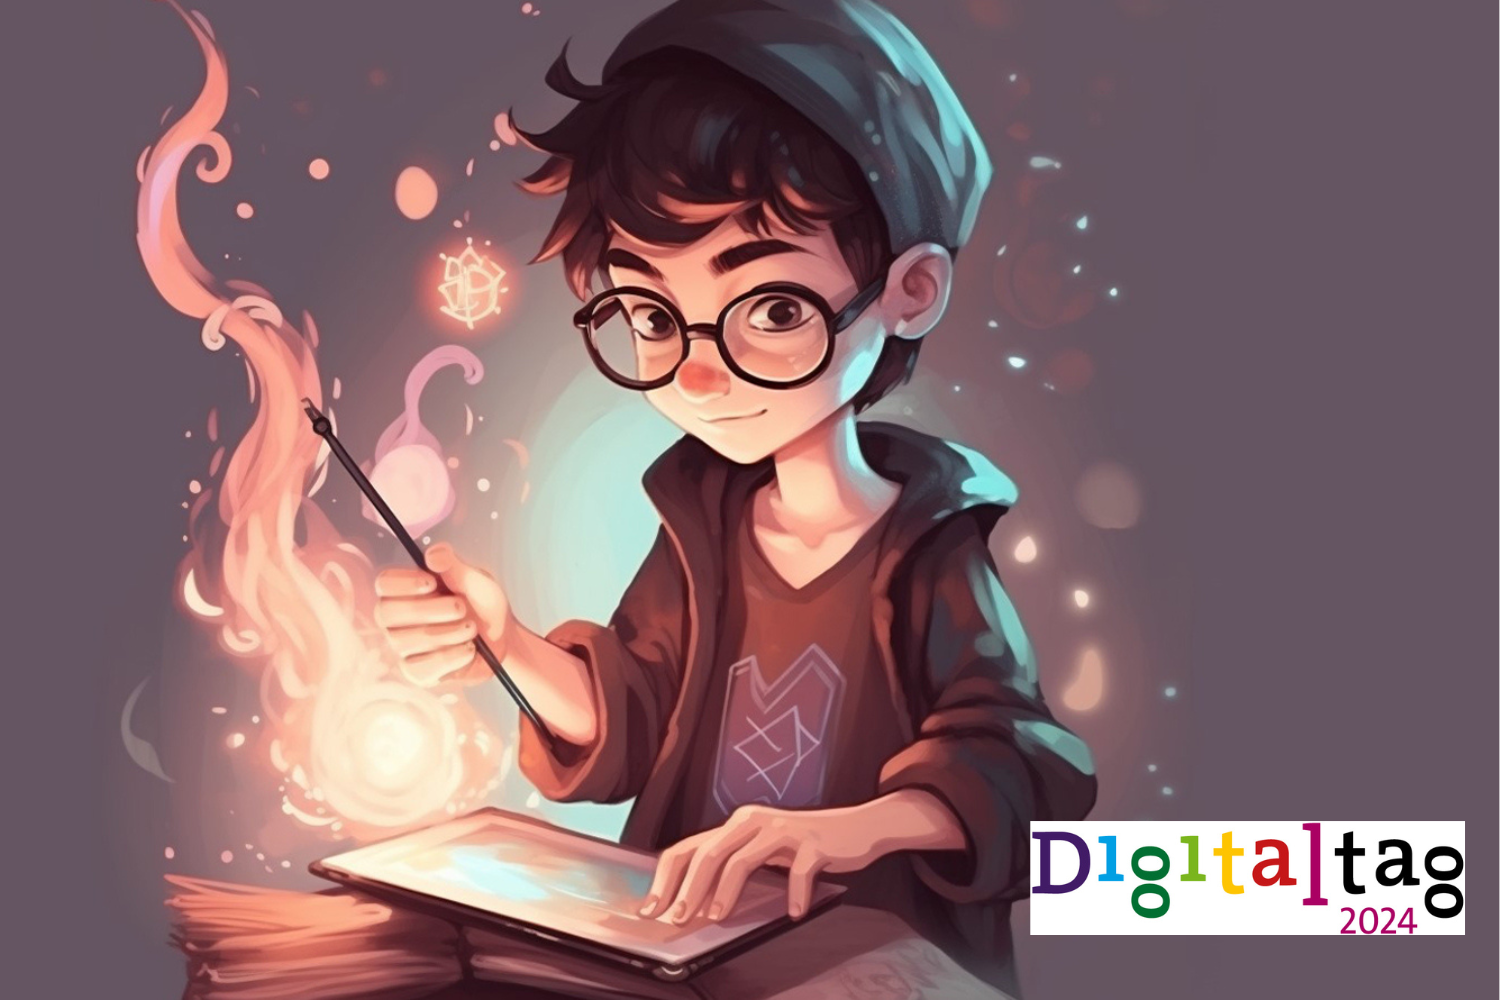 A little boy (cartoon character) tries to do magic and the digital tag logo.